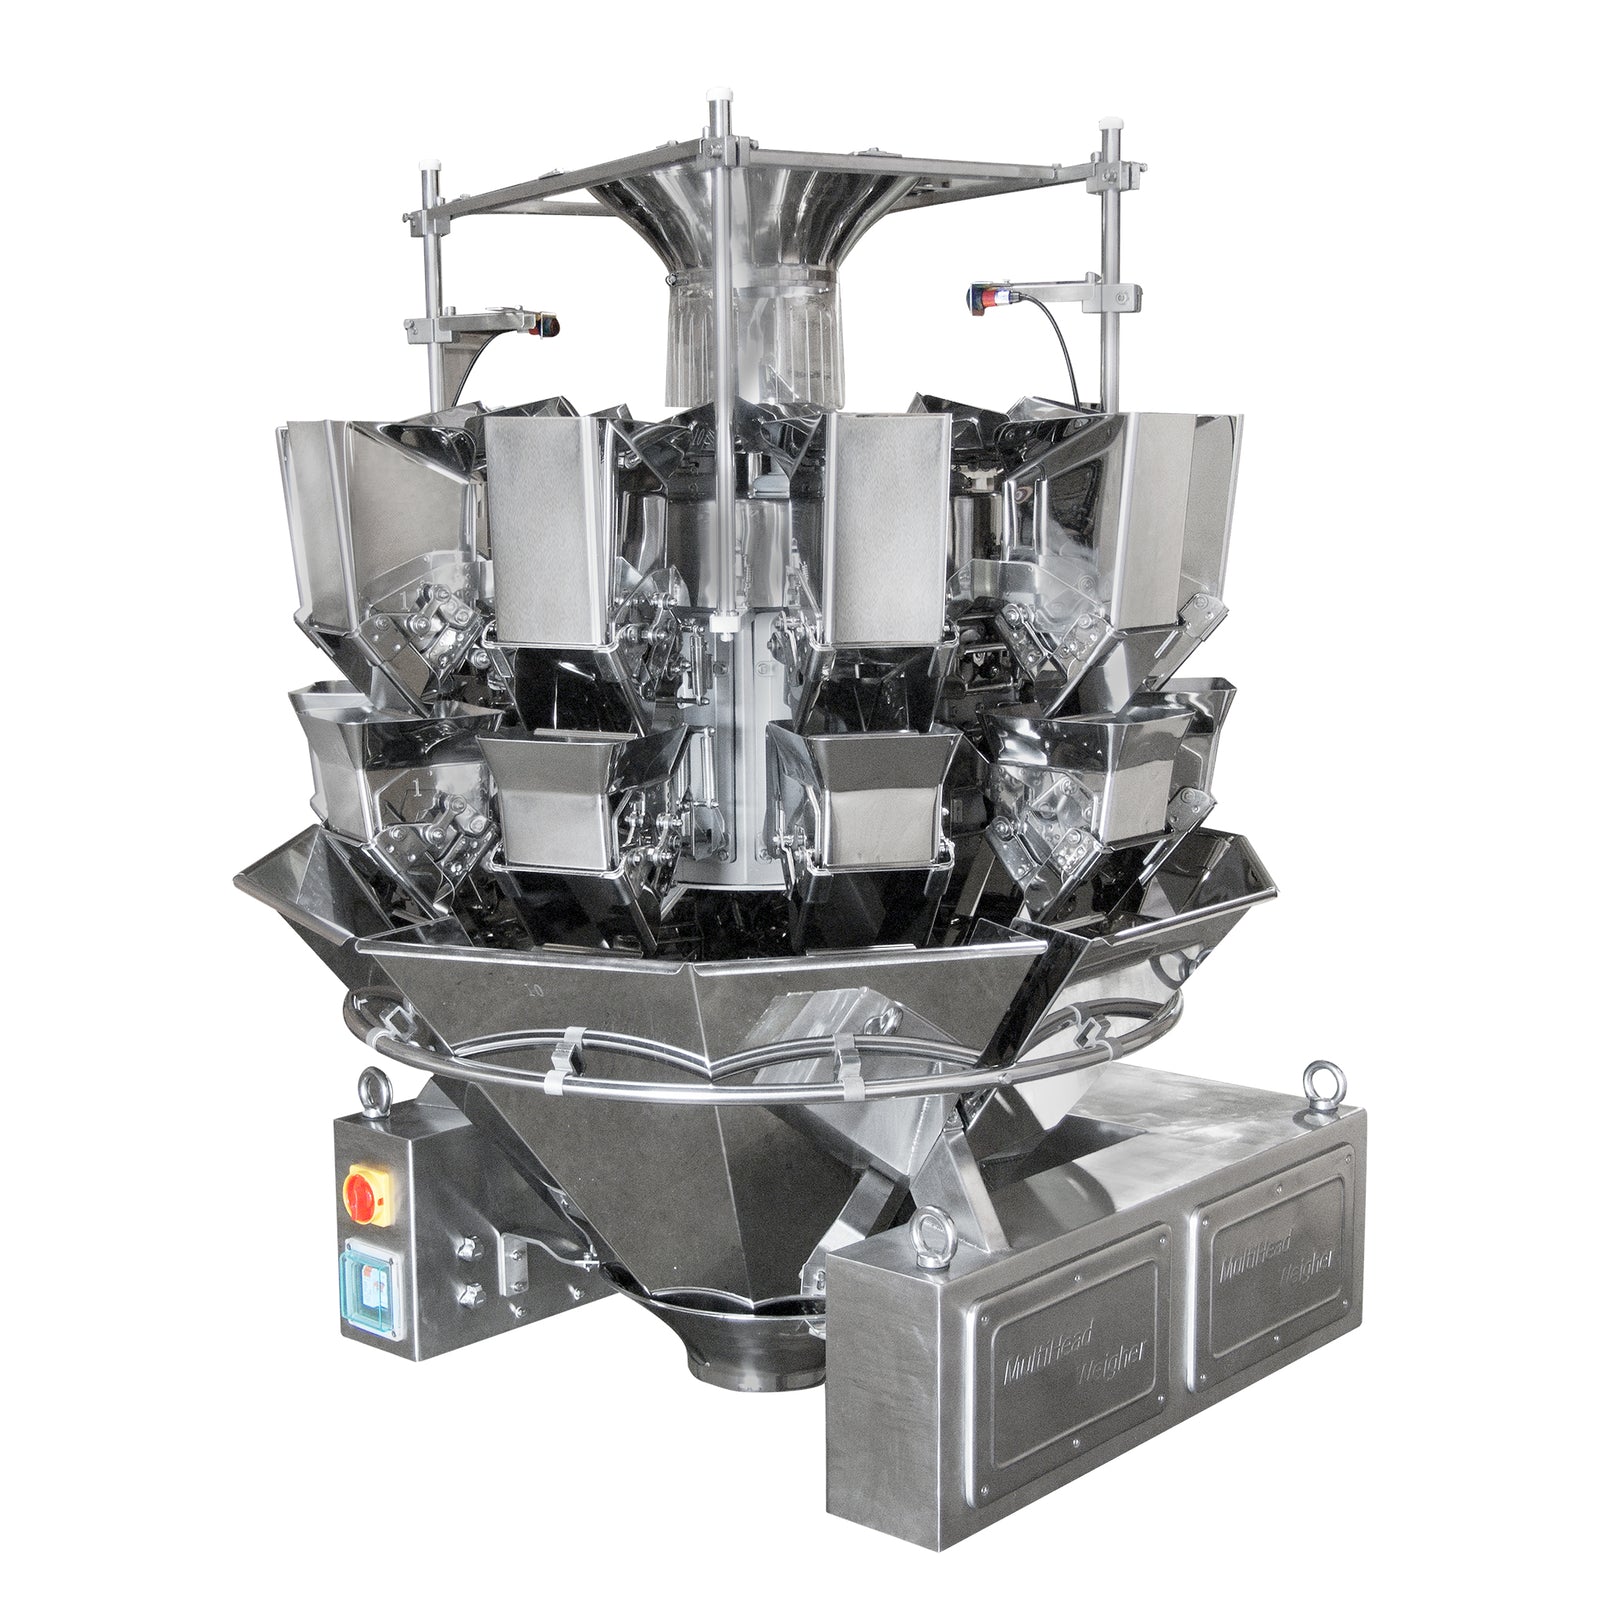 The Jorestech stainless steel 10 head radial combination weigher in a diagonal view over white background